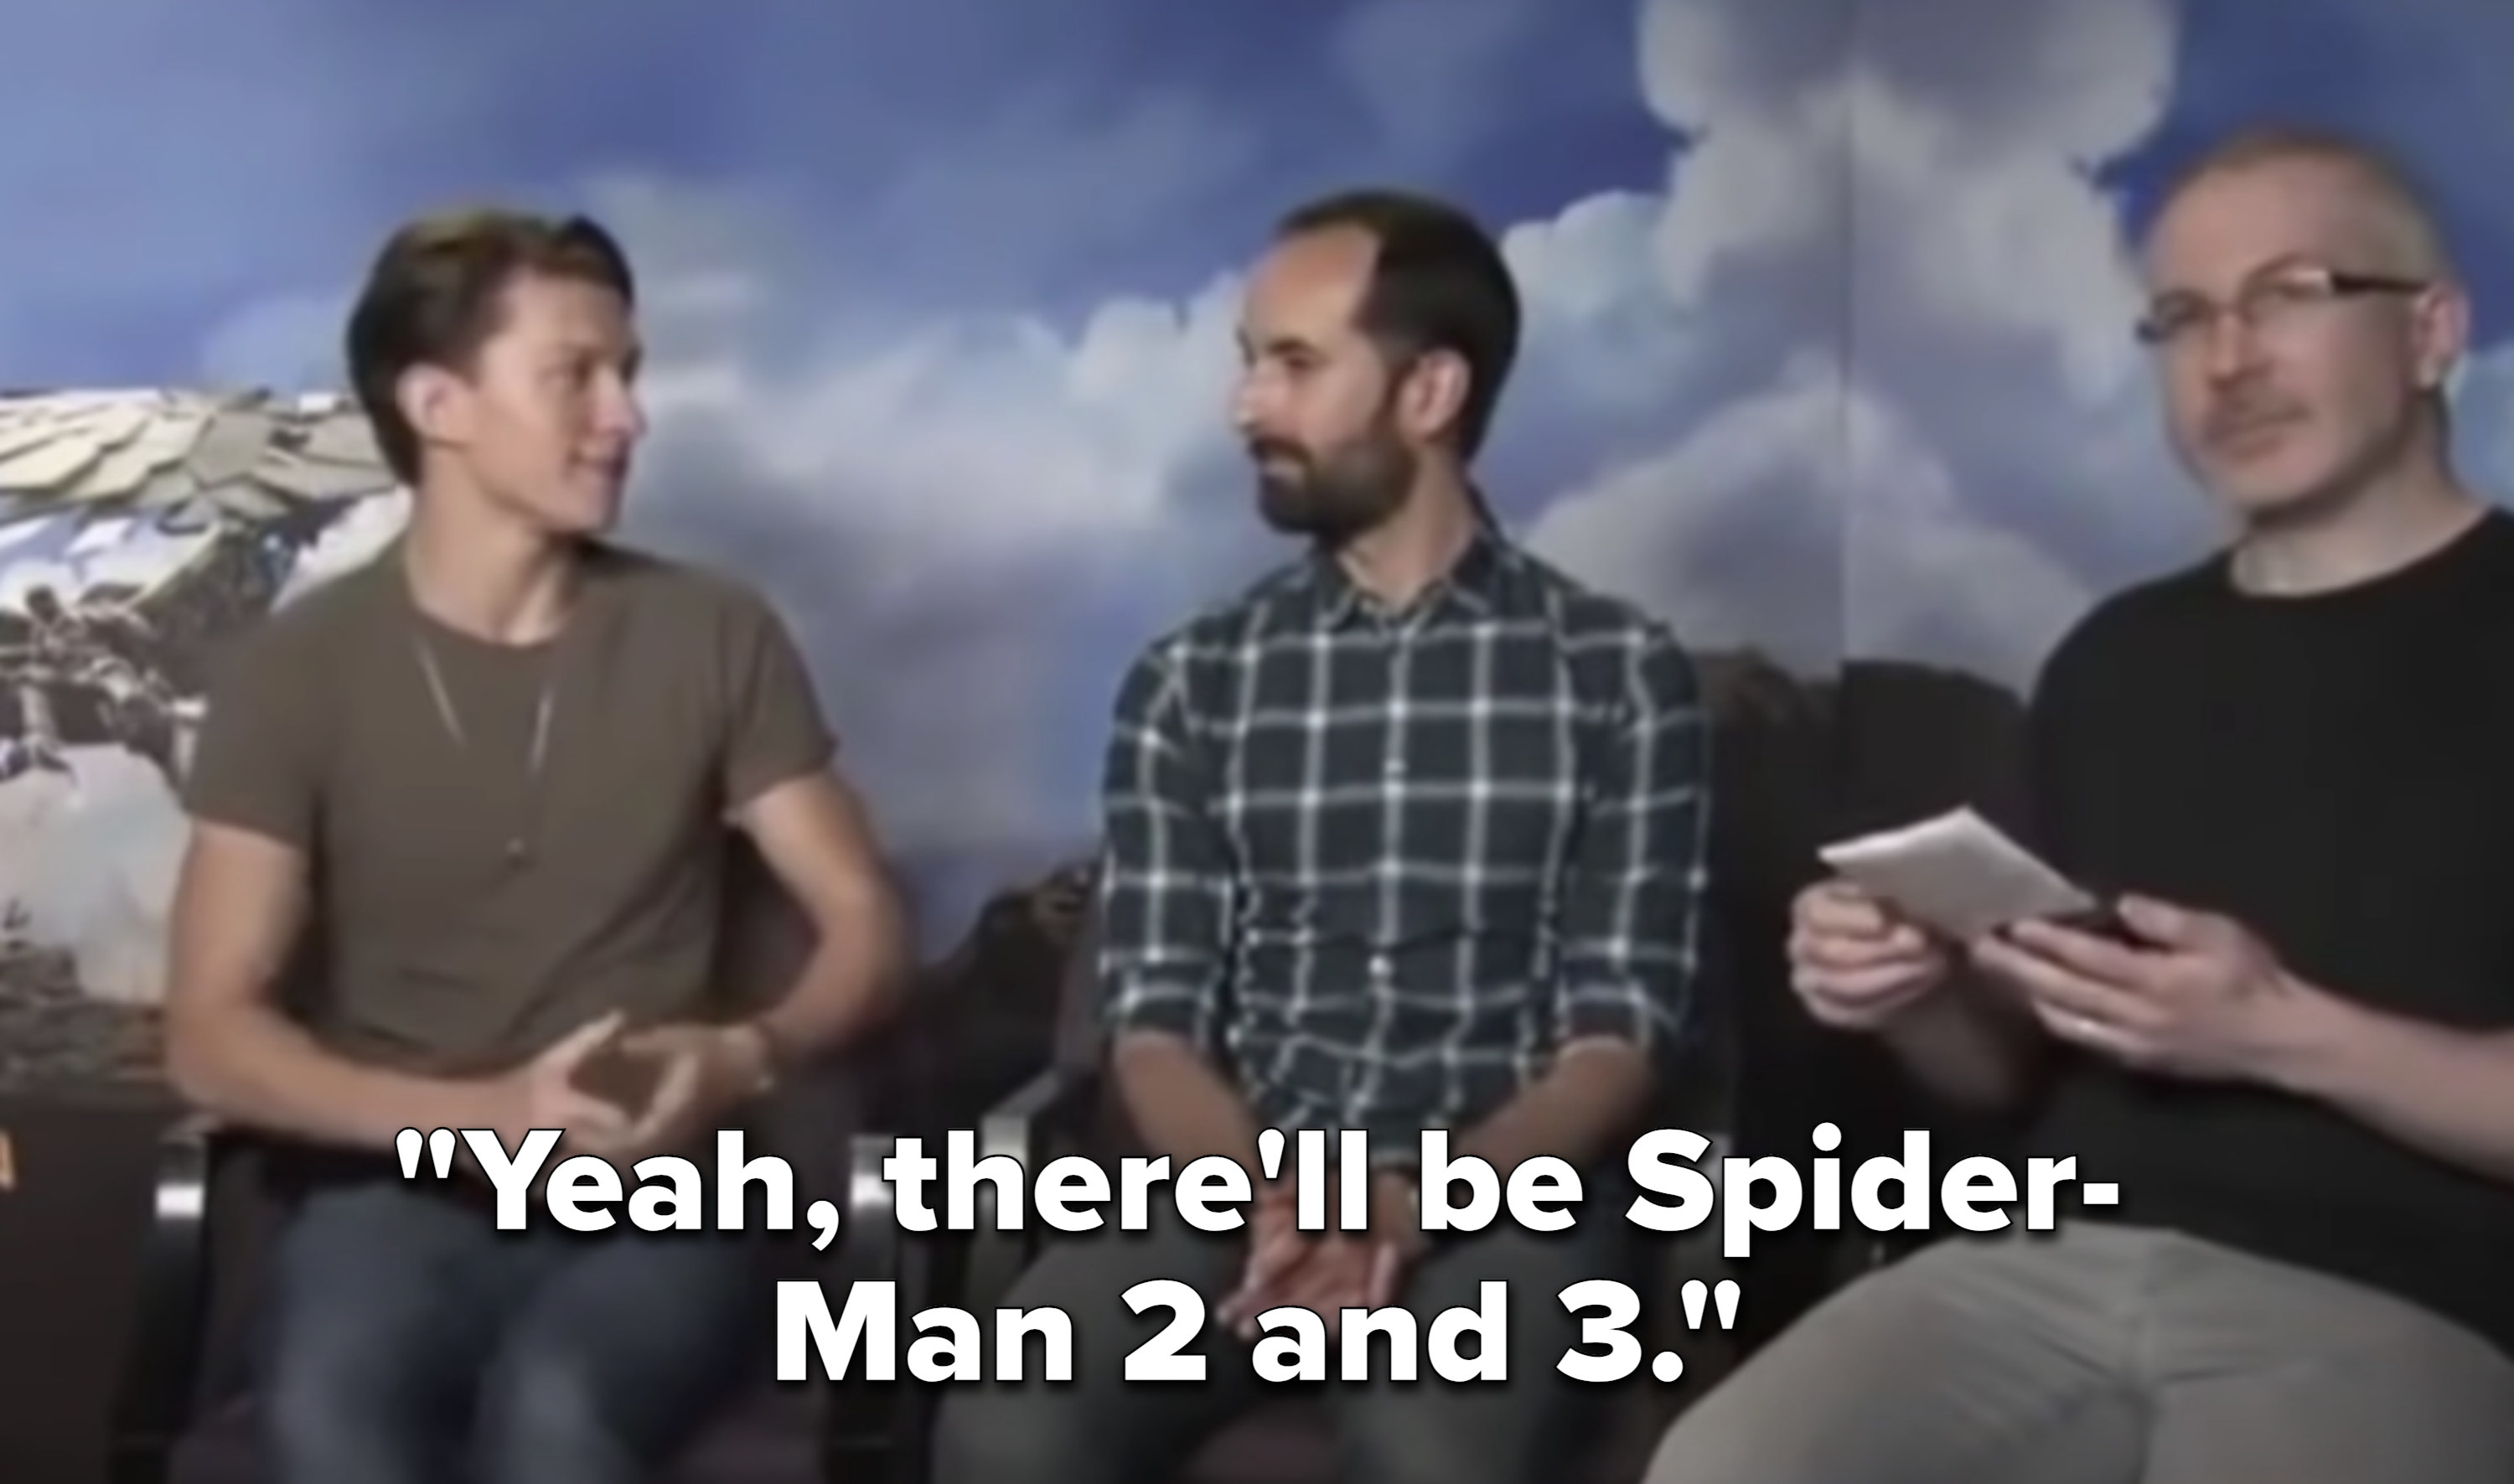 Holland saying &quot;Yeah, there&#x27;ll be Spider-Man 2 and 3&quot;